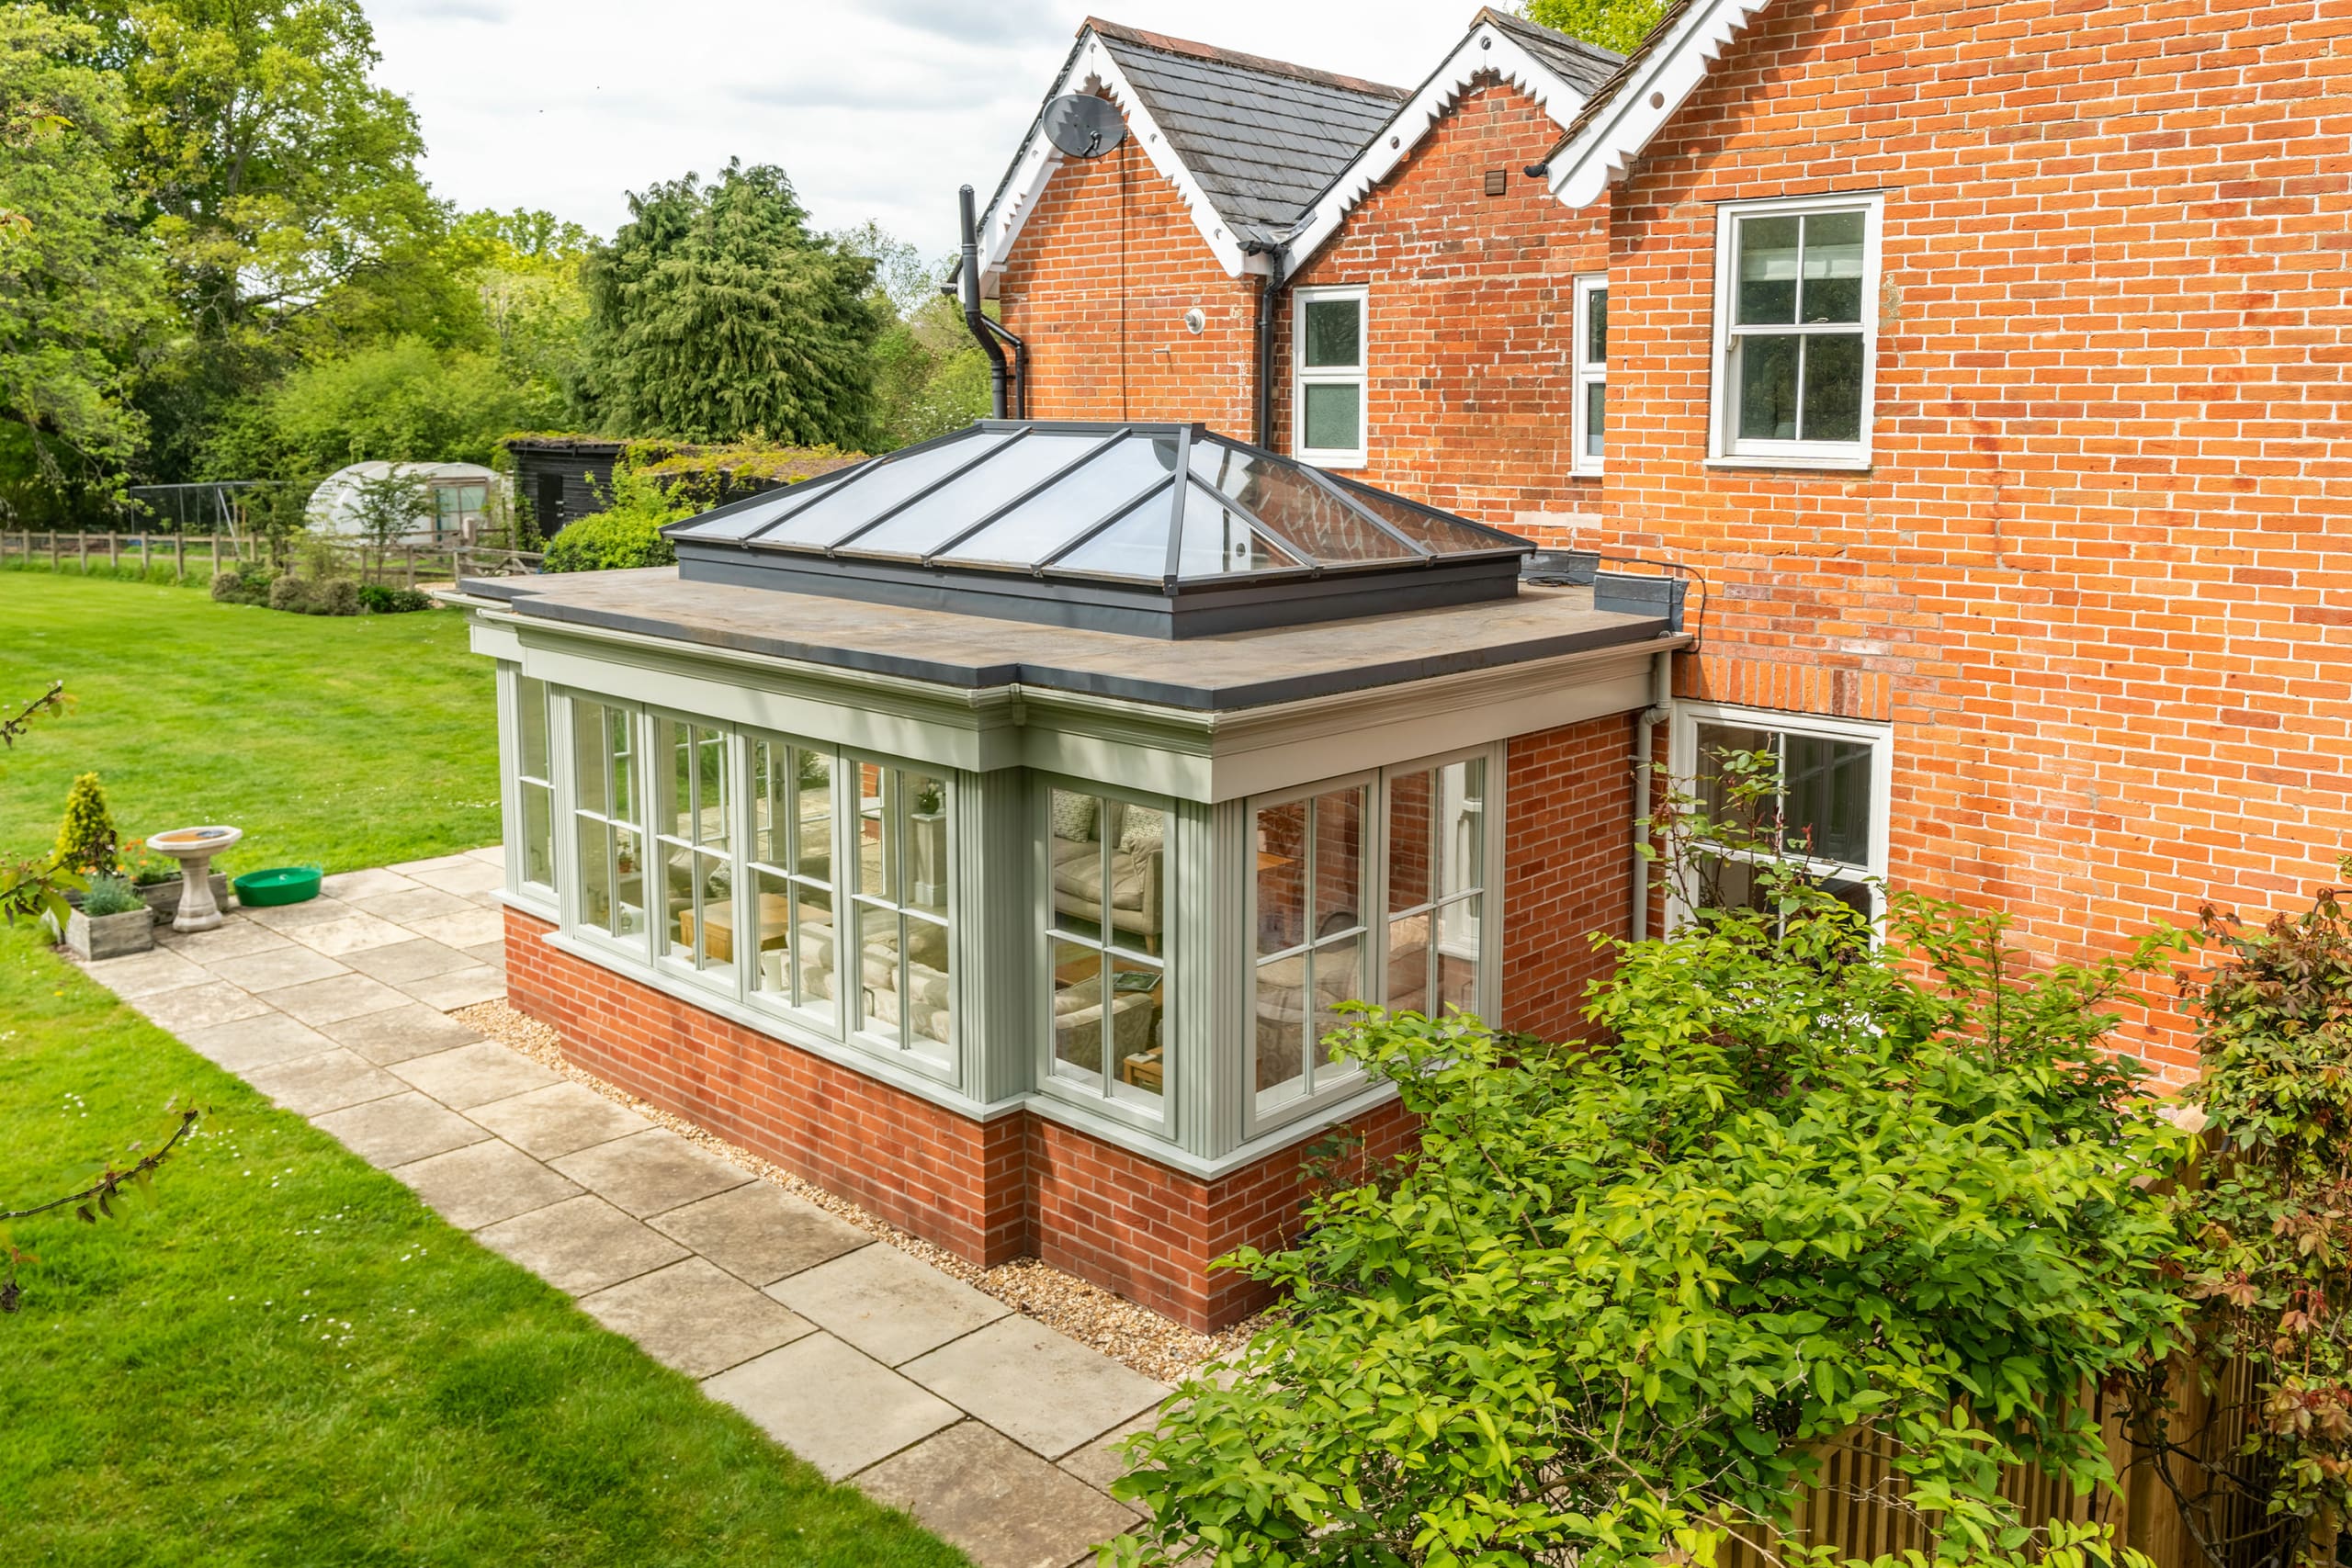 Orangery exterior with roof lantern and green framework.